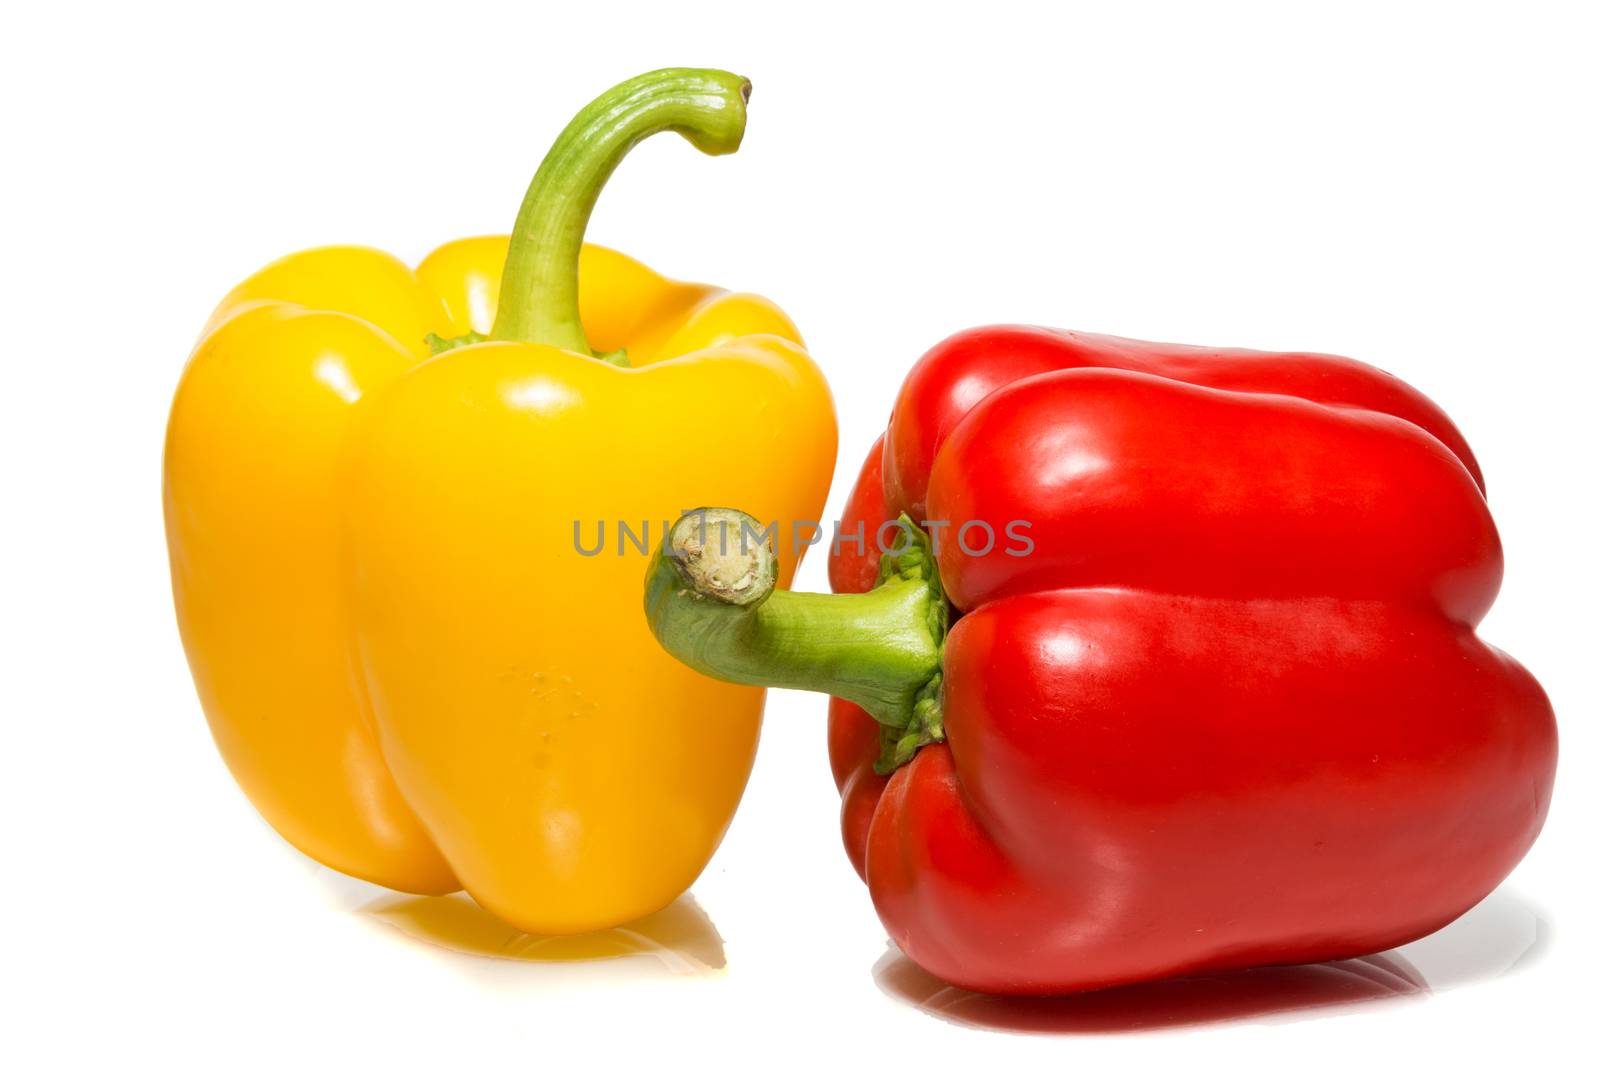 The photograph depicts peppers on a white background